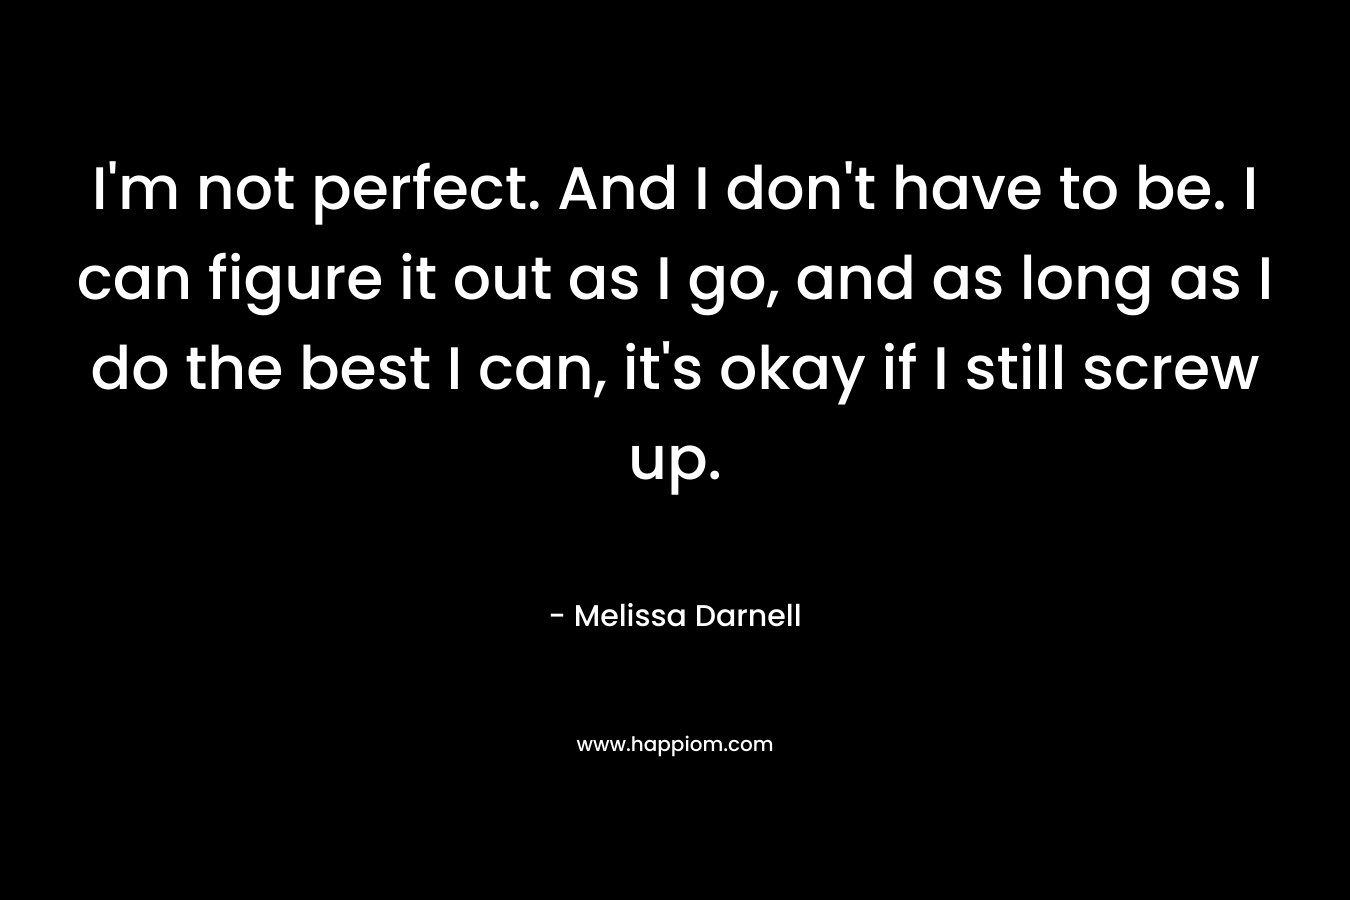 I’m not perfect. And I don’t have to be. I can figure it out as I go, and as long as I do the best I can, it’s okay if I still screw up. – Melissa Darnell